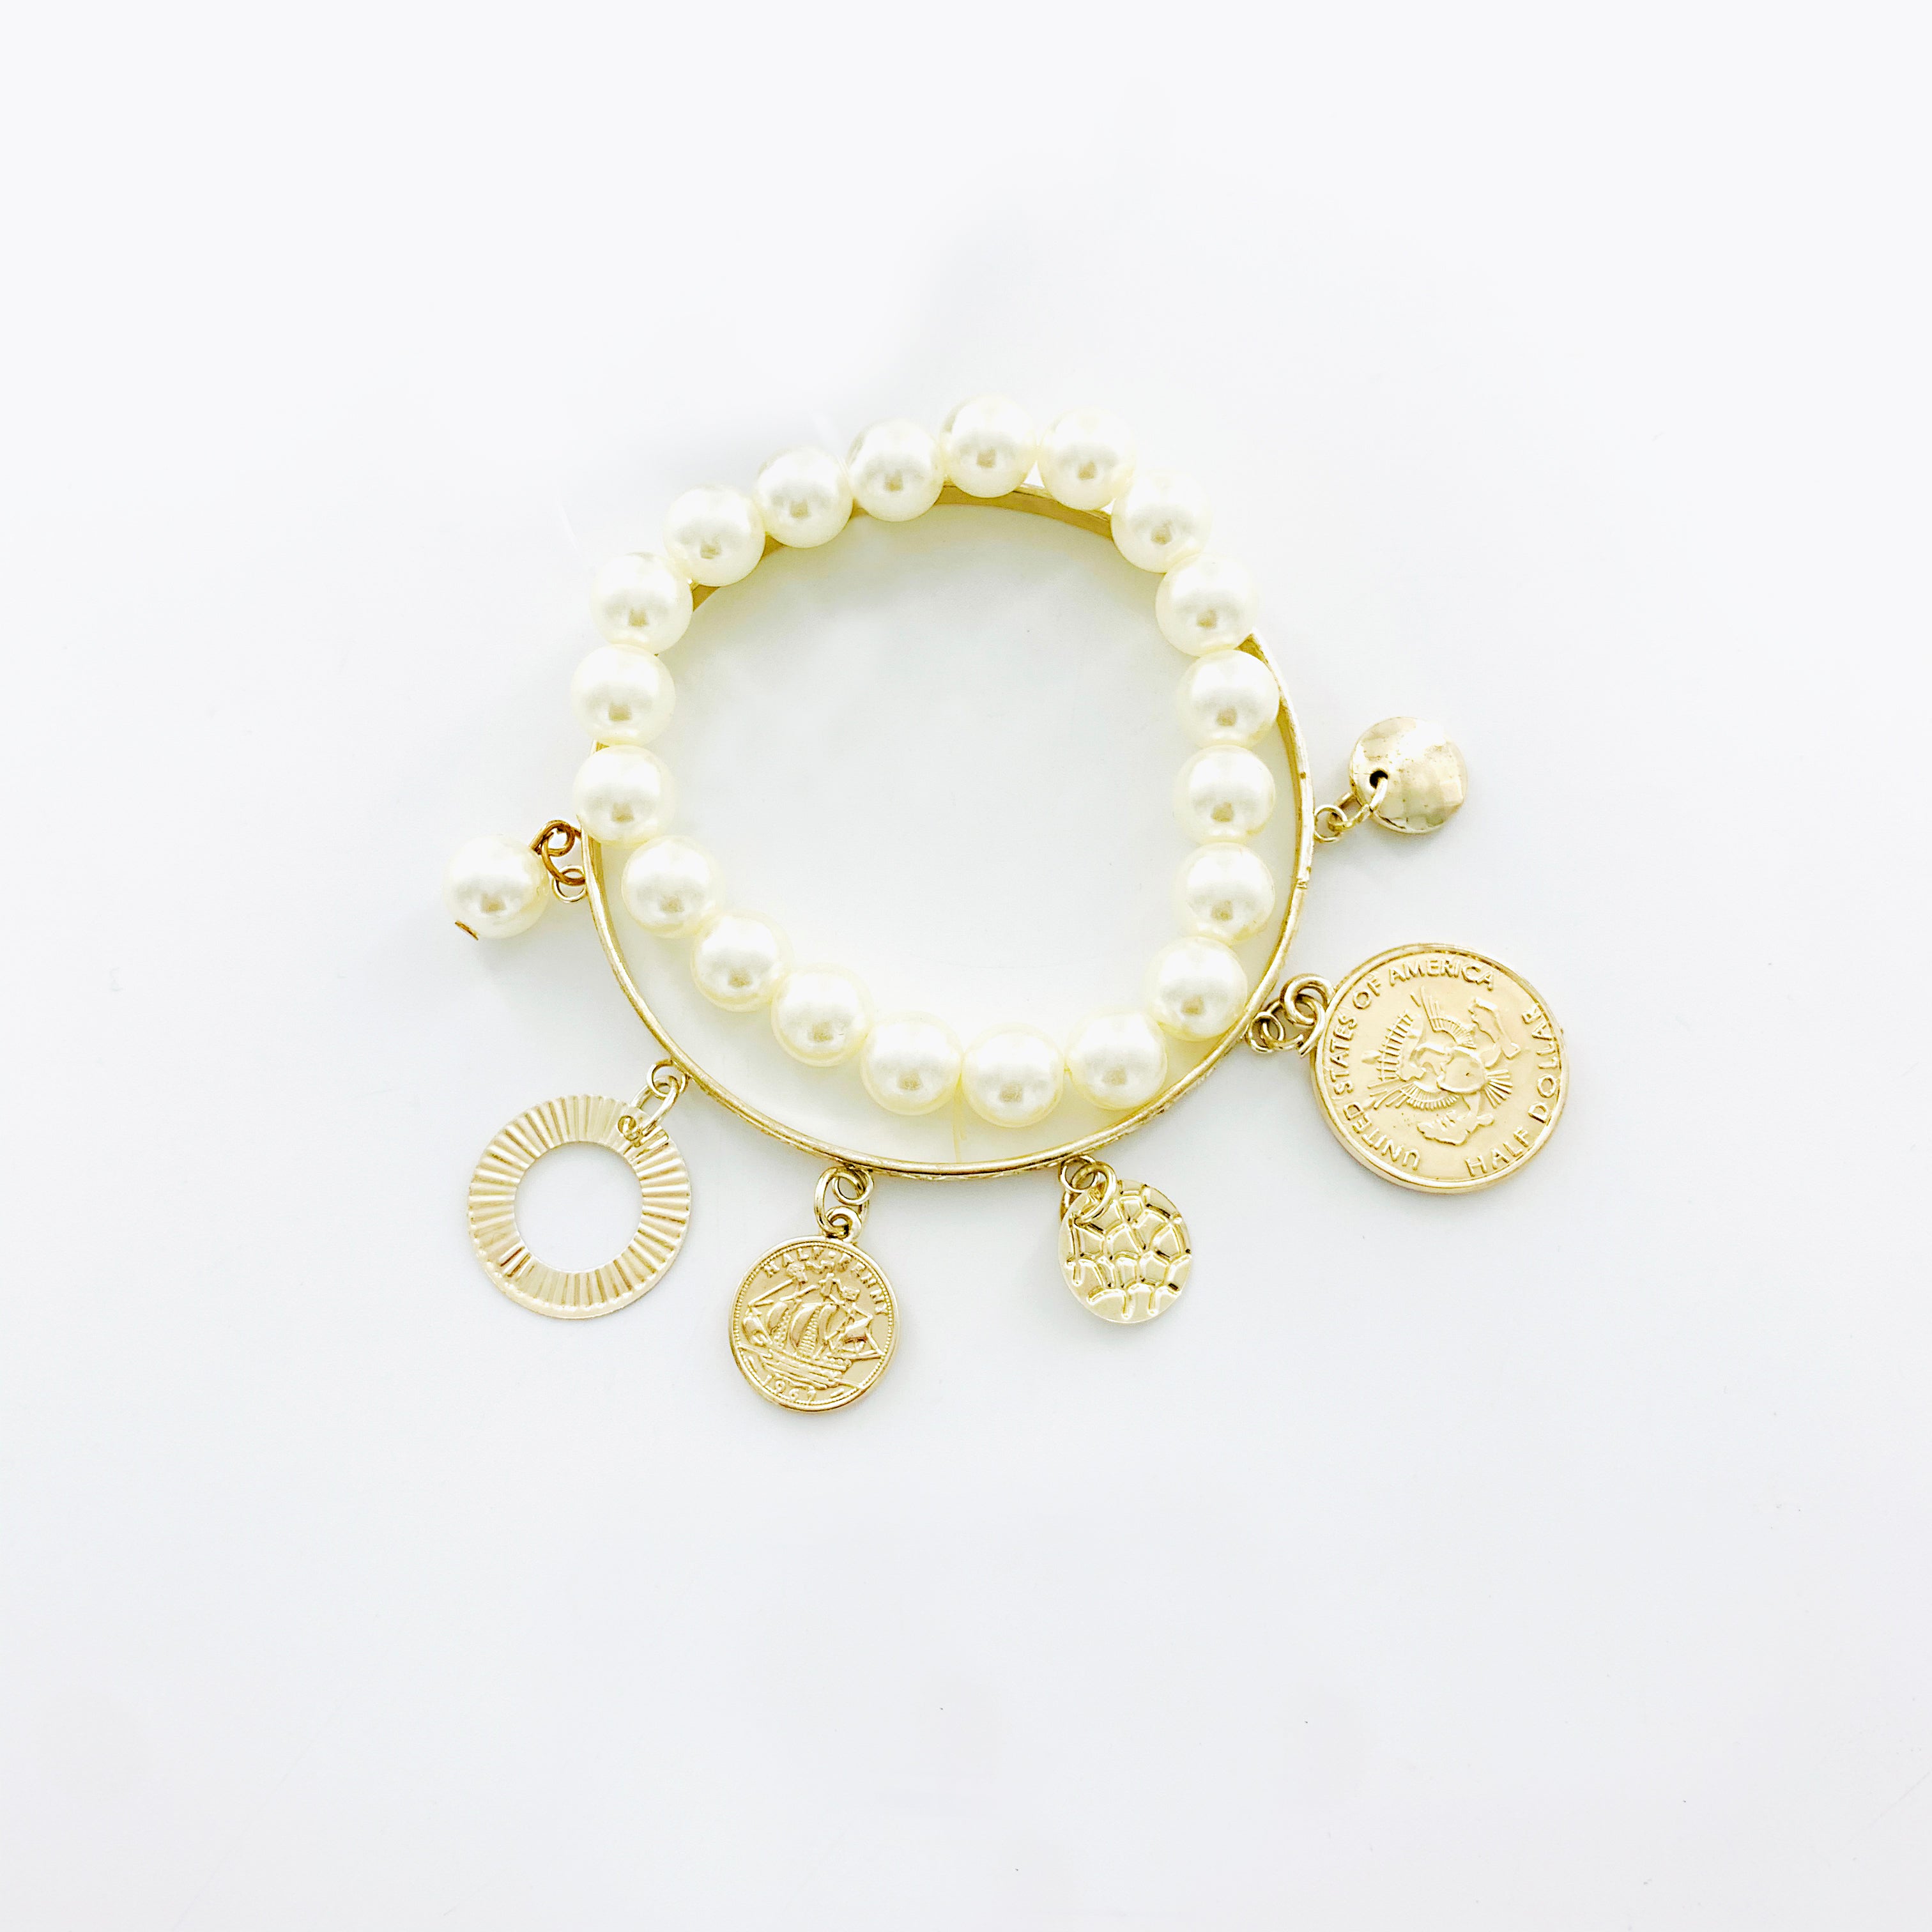 Pearl and gold bangle with gold coin charms - Light gold